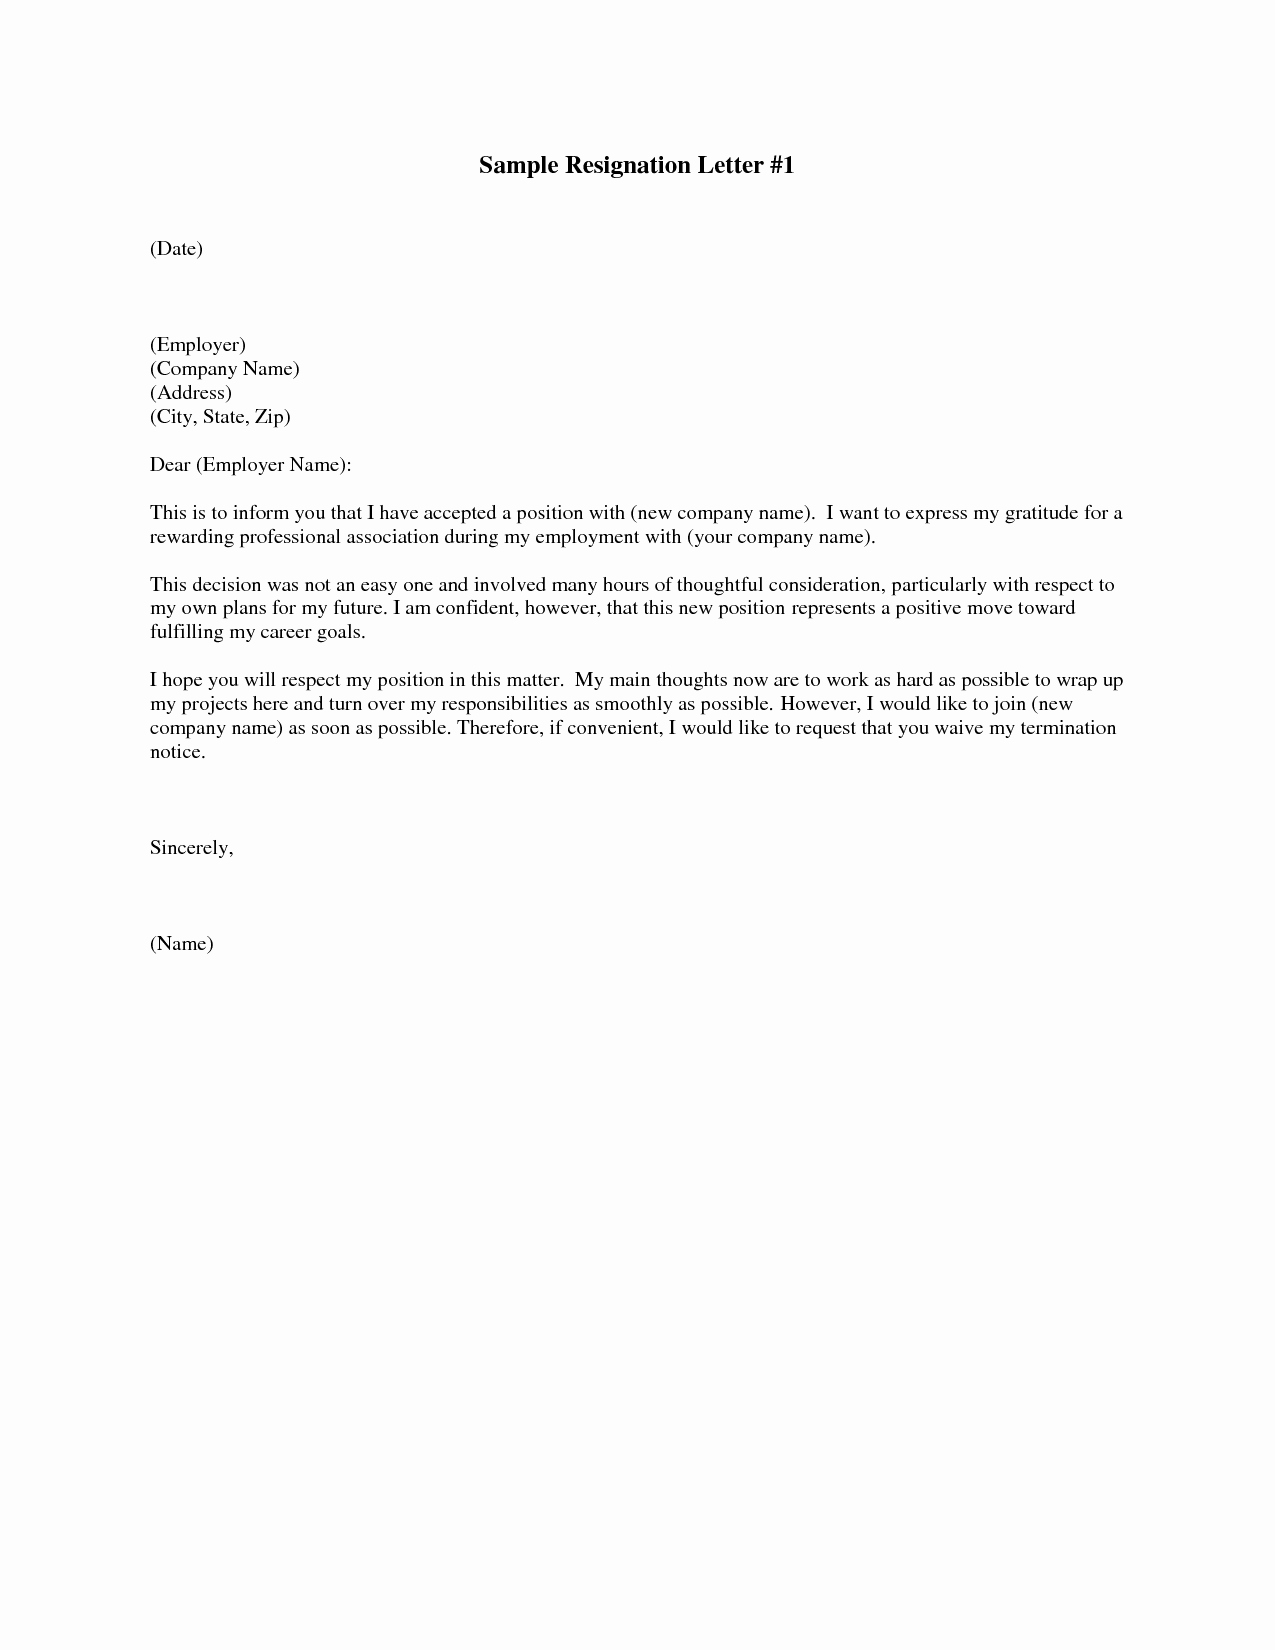 Resignation Letter Sample Free New How to Write Easy Simple Resignation Letter Sample